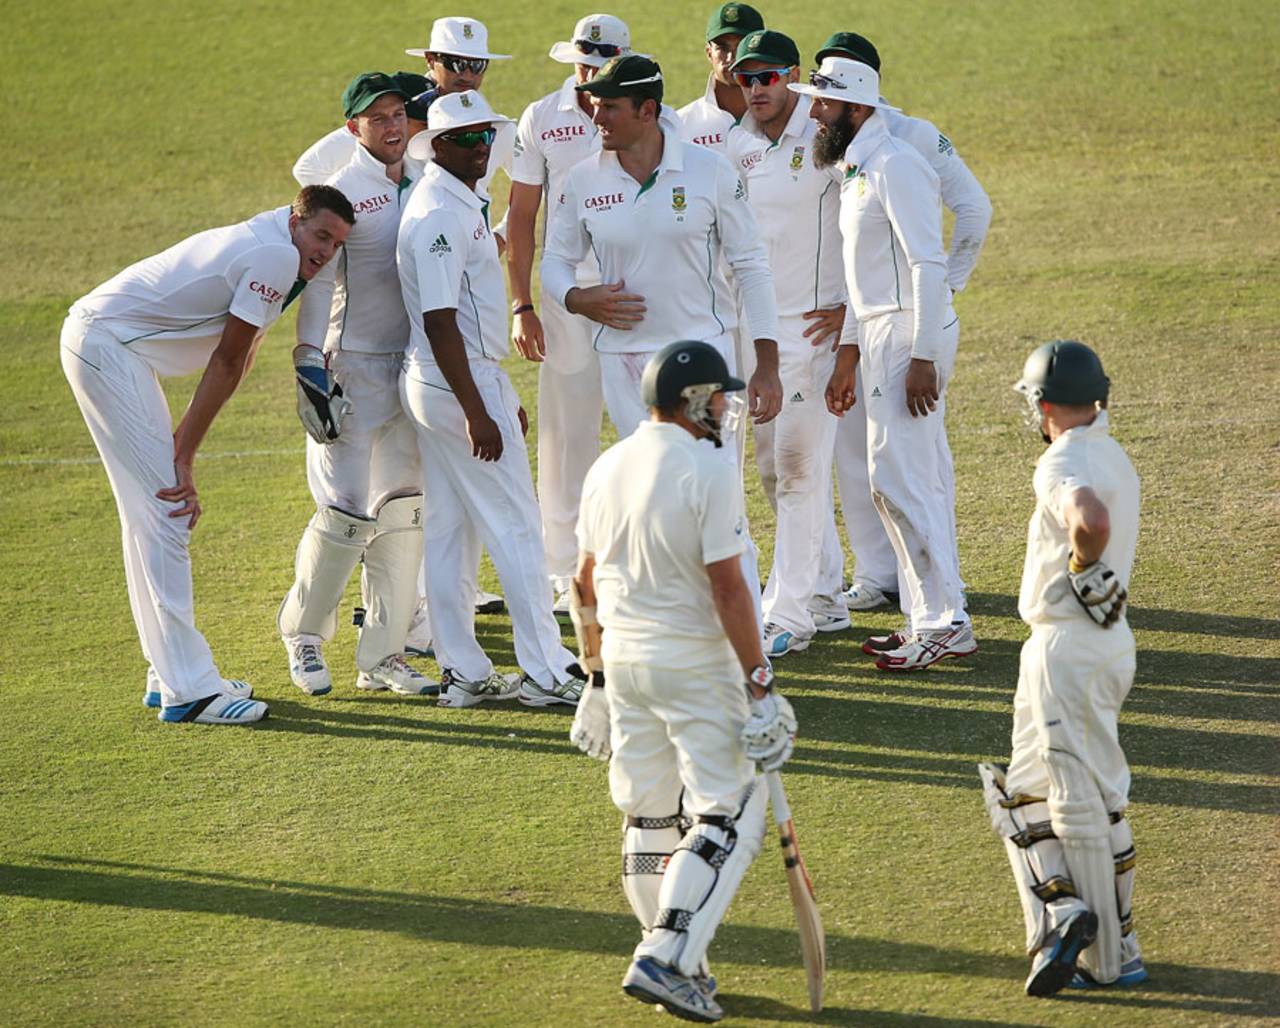 The players await an lbw decision from a review, South Africa v Australia, 2nd Test, Port Elizabeth, 4th day, February 23, 2014